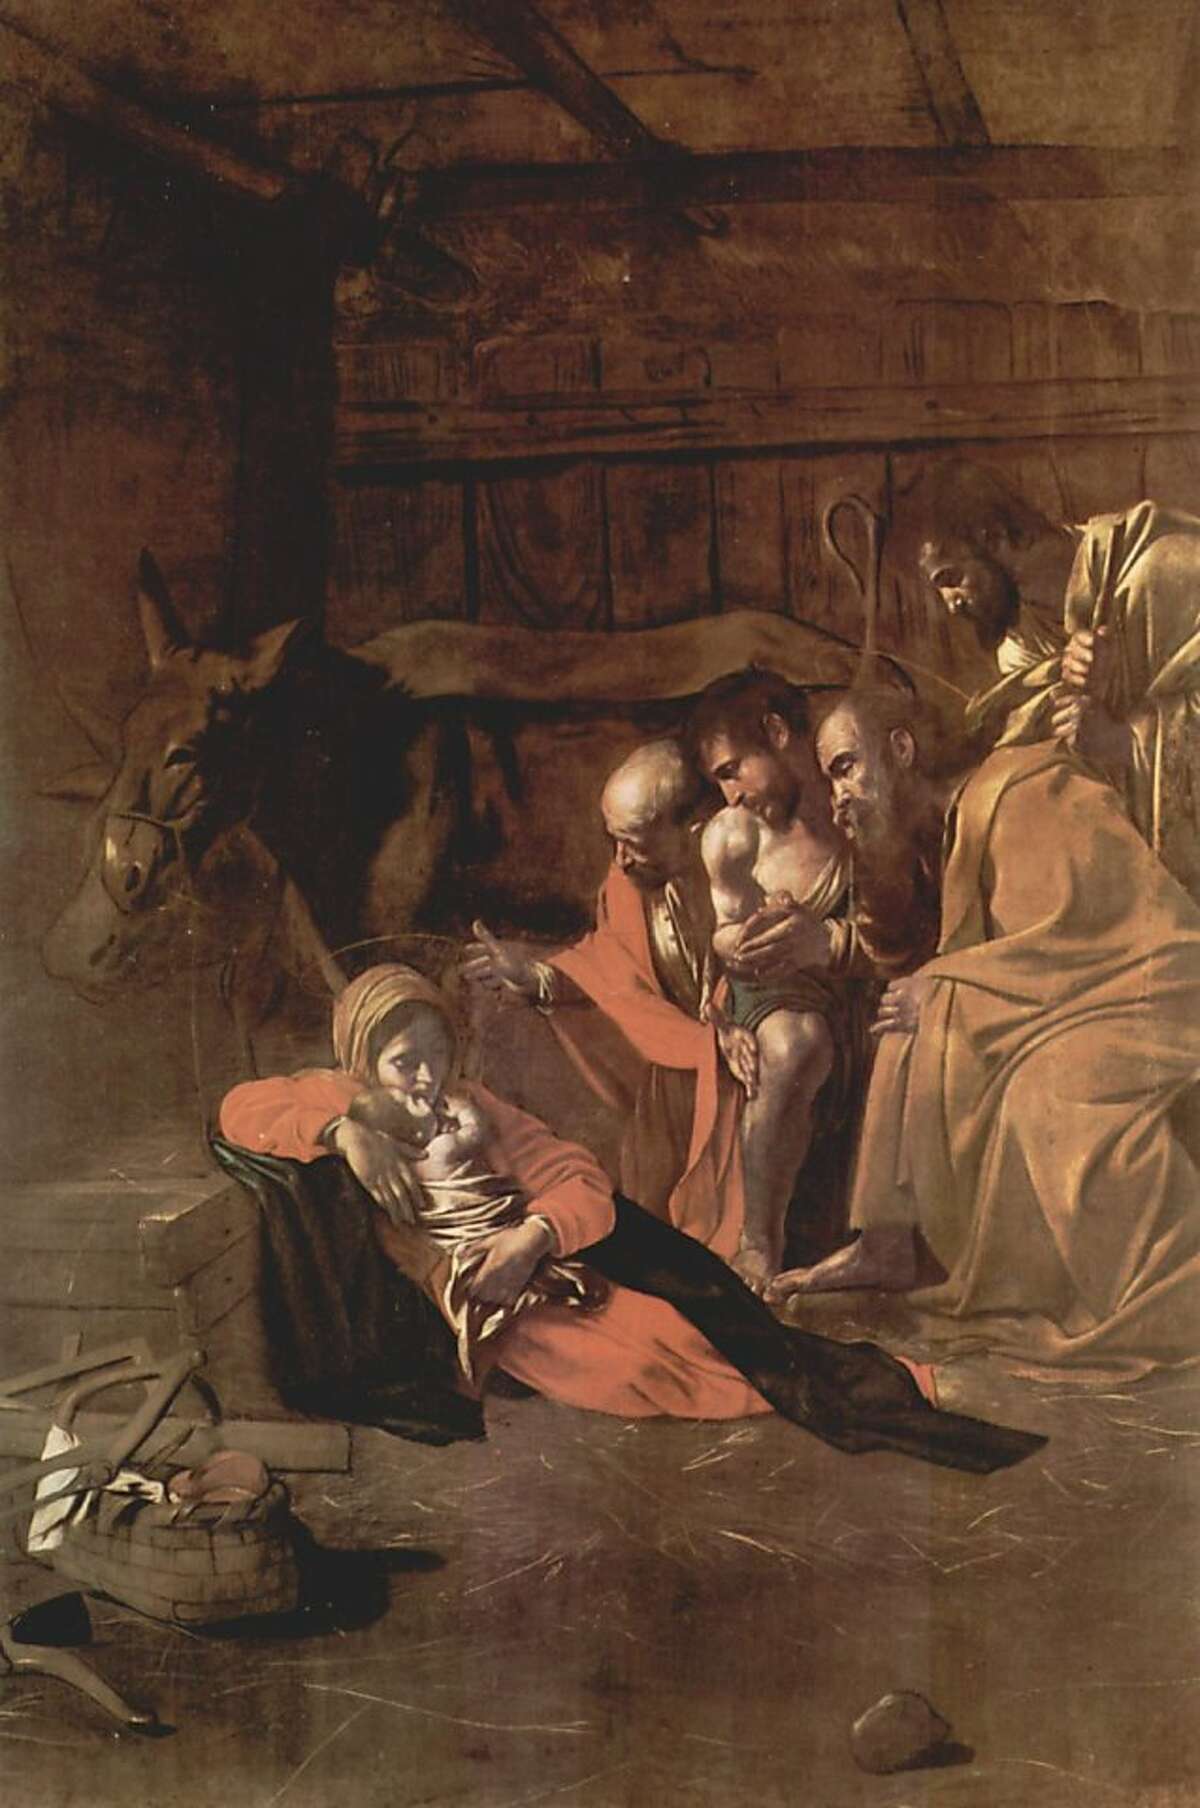 "The Adoration of the Shepherds," one of the last major paintings by Michelangelo Merisi da Caravaggio, will be on temporary display at the Legion of Honor in San Francisco spring 2013 as part of the Year of Italian Culture.